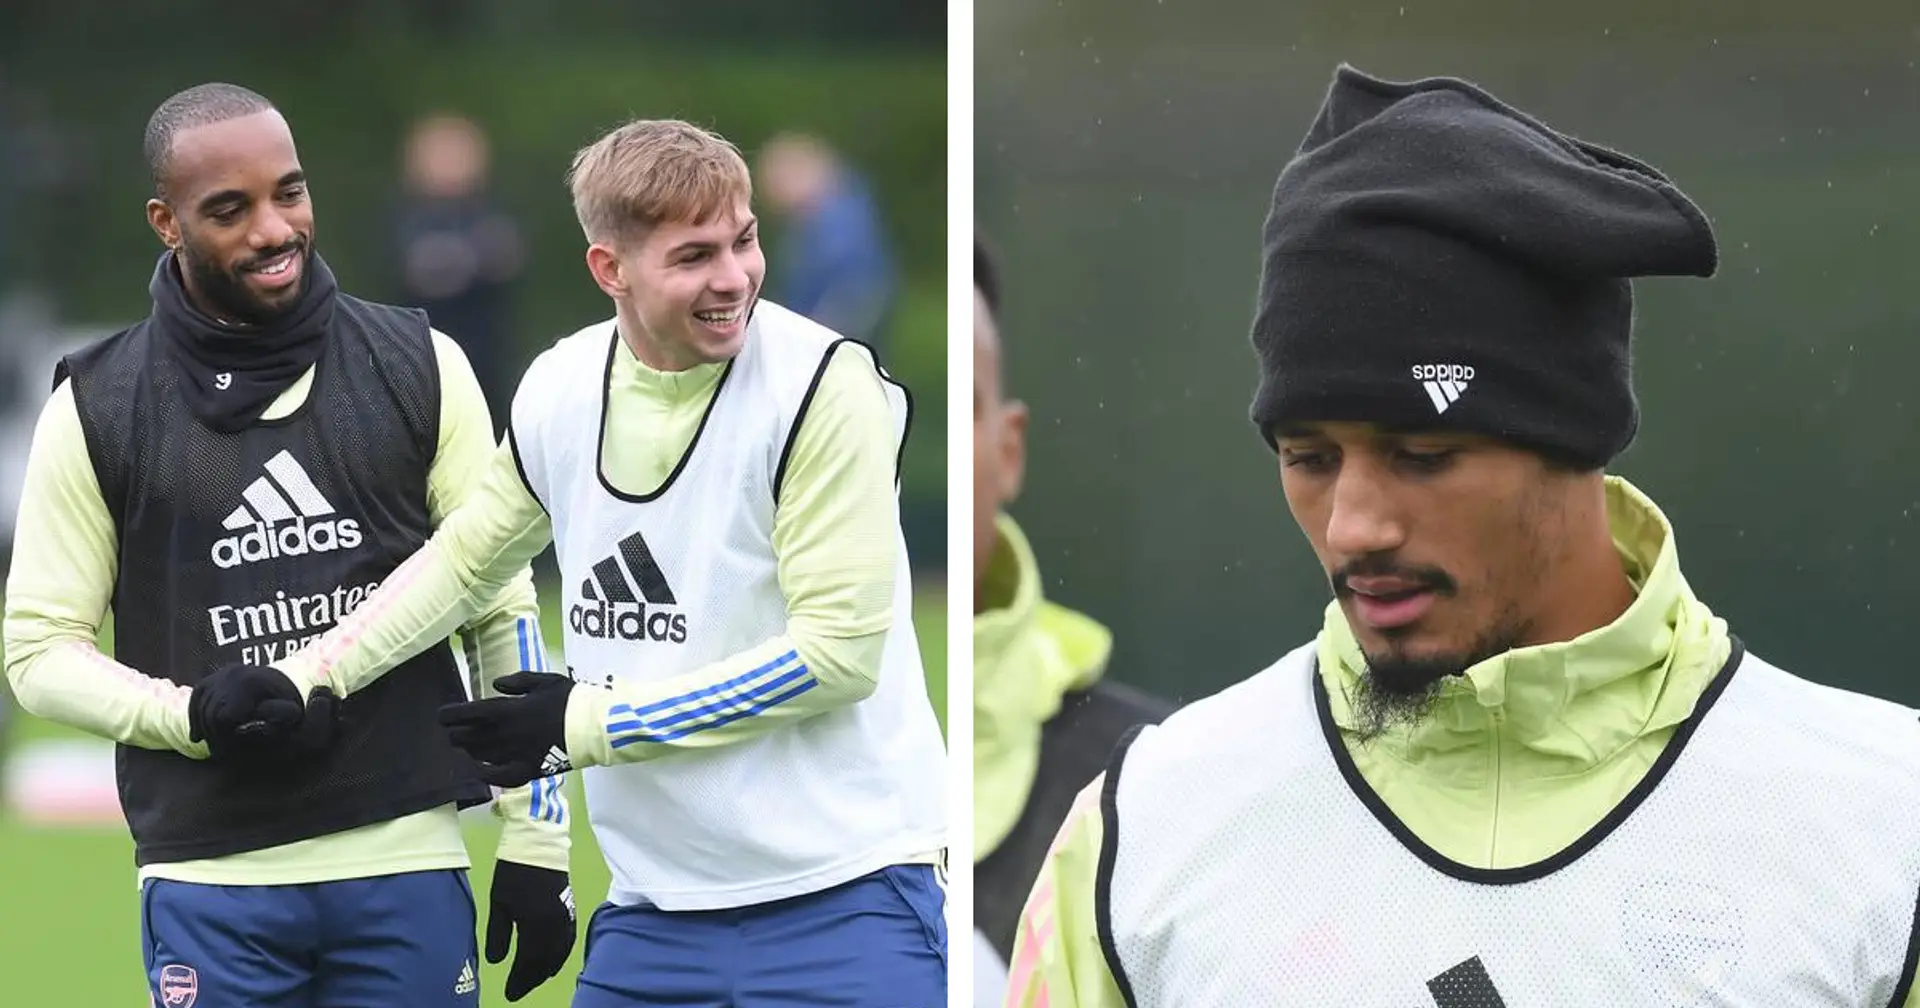 Returning Smith Rowe, contemplative Saliba & more: 5 things spotted in pre-Sheffield training